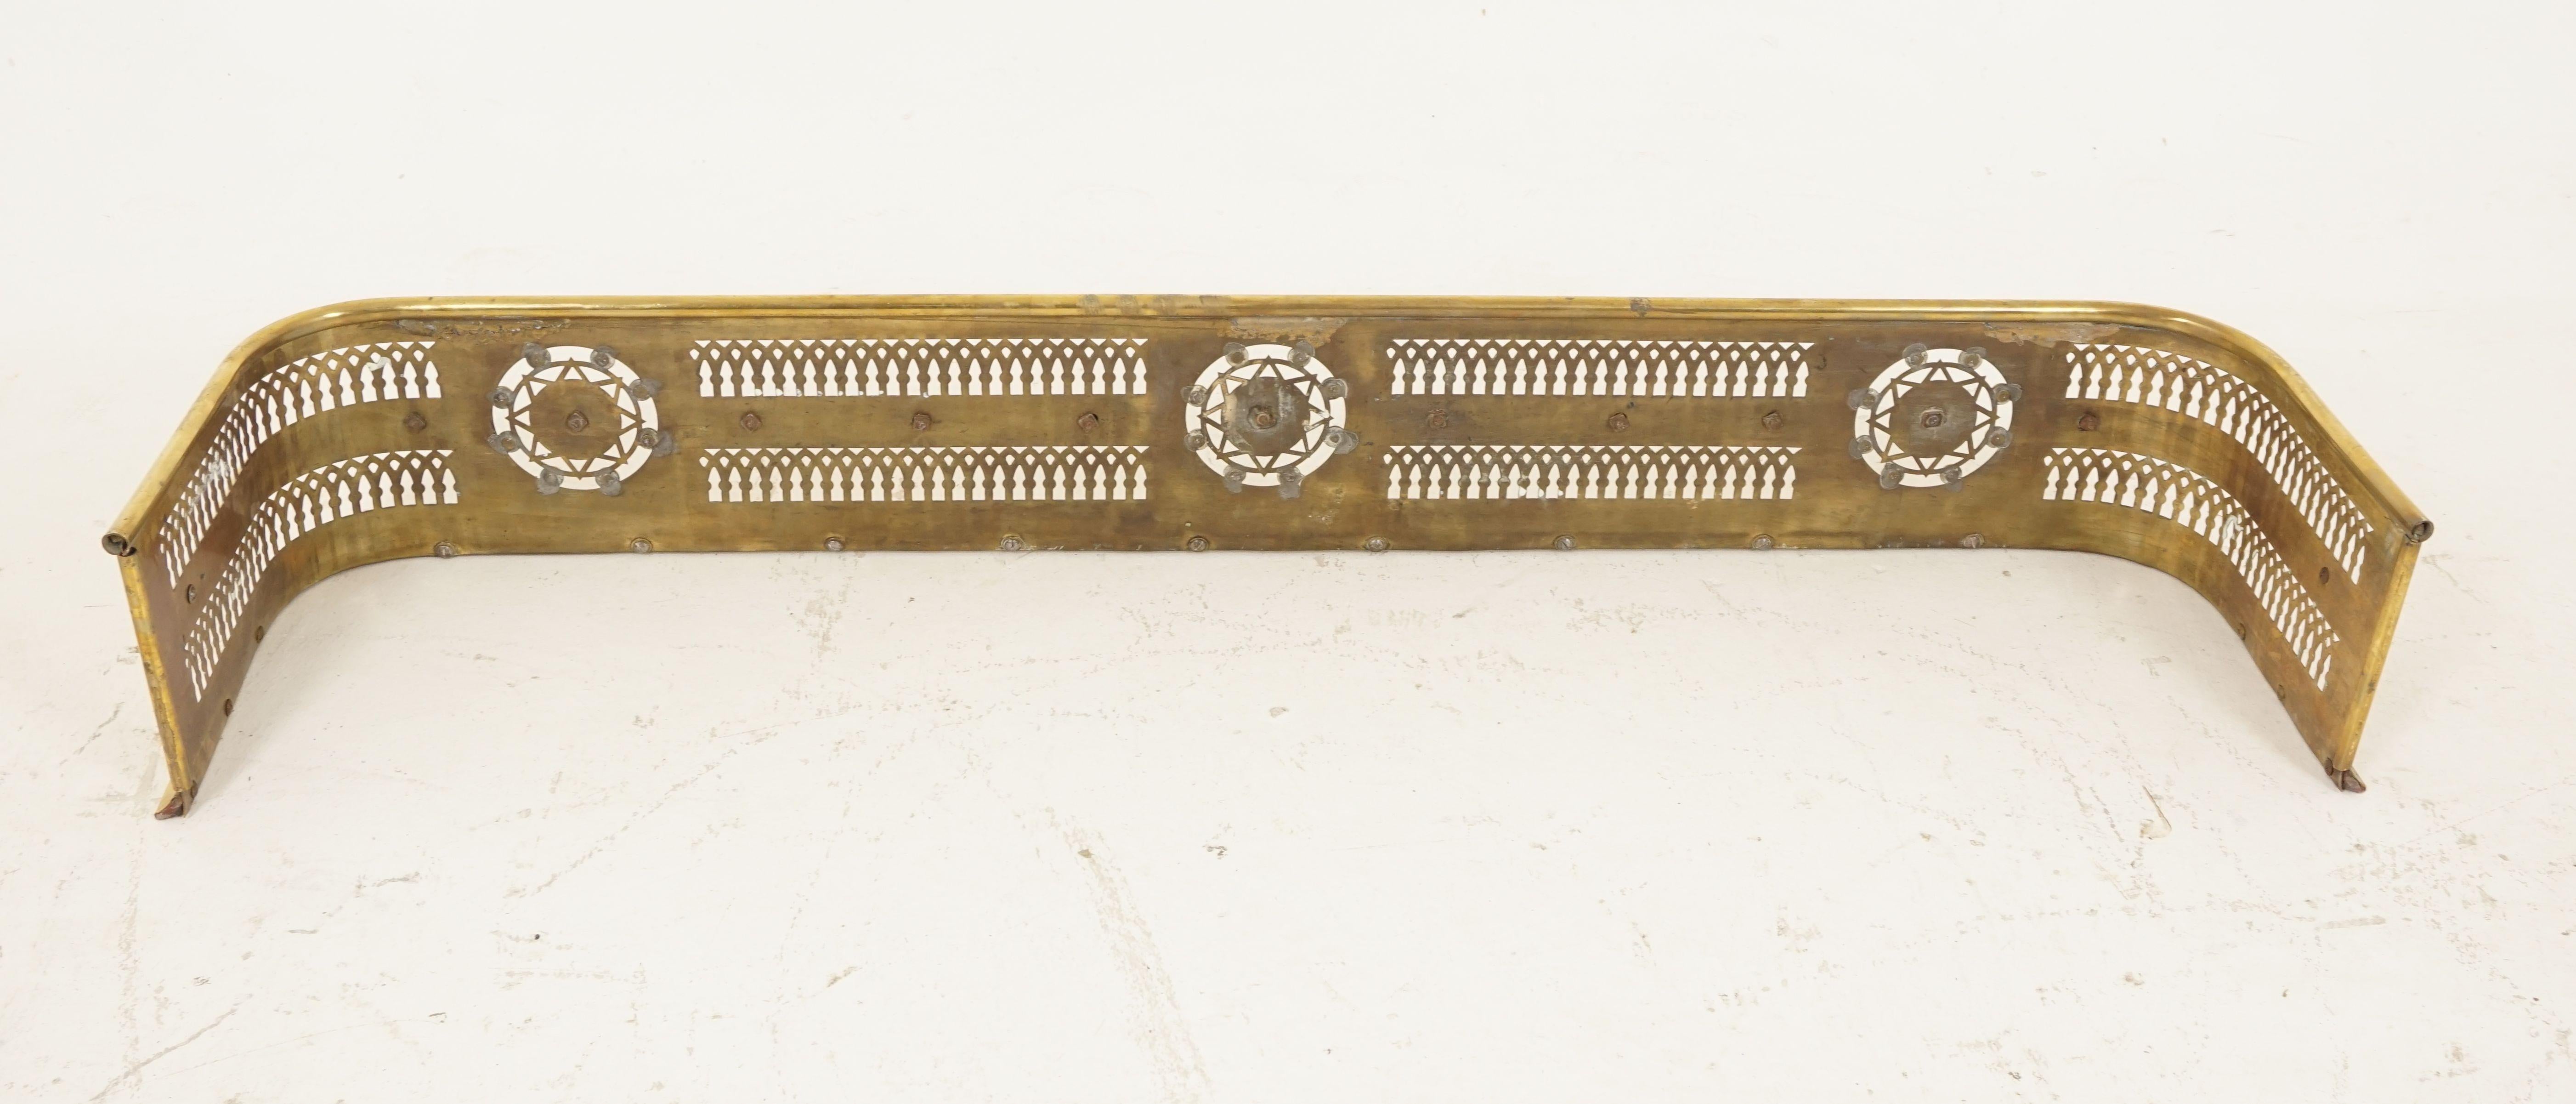 Early 20th Century Antique Brass Fireplace Surround, Fender Hearth Guard, Scotland, 1900